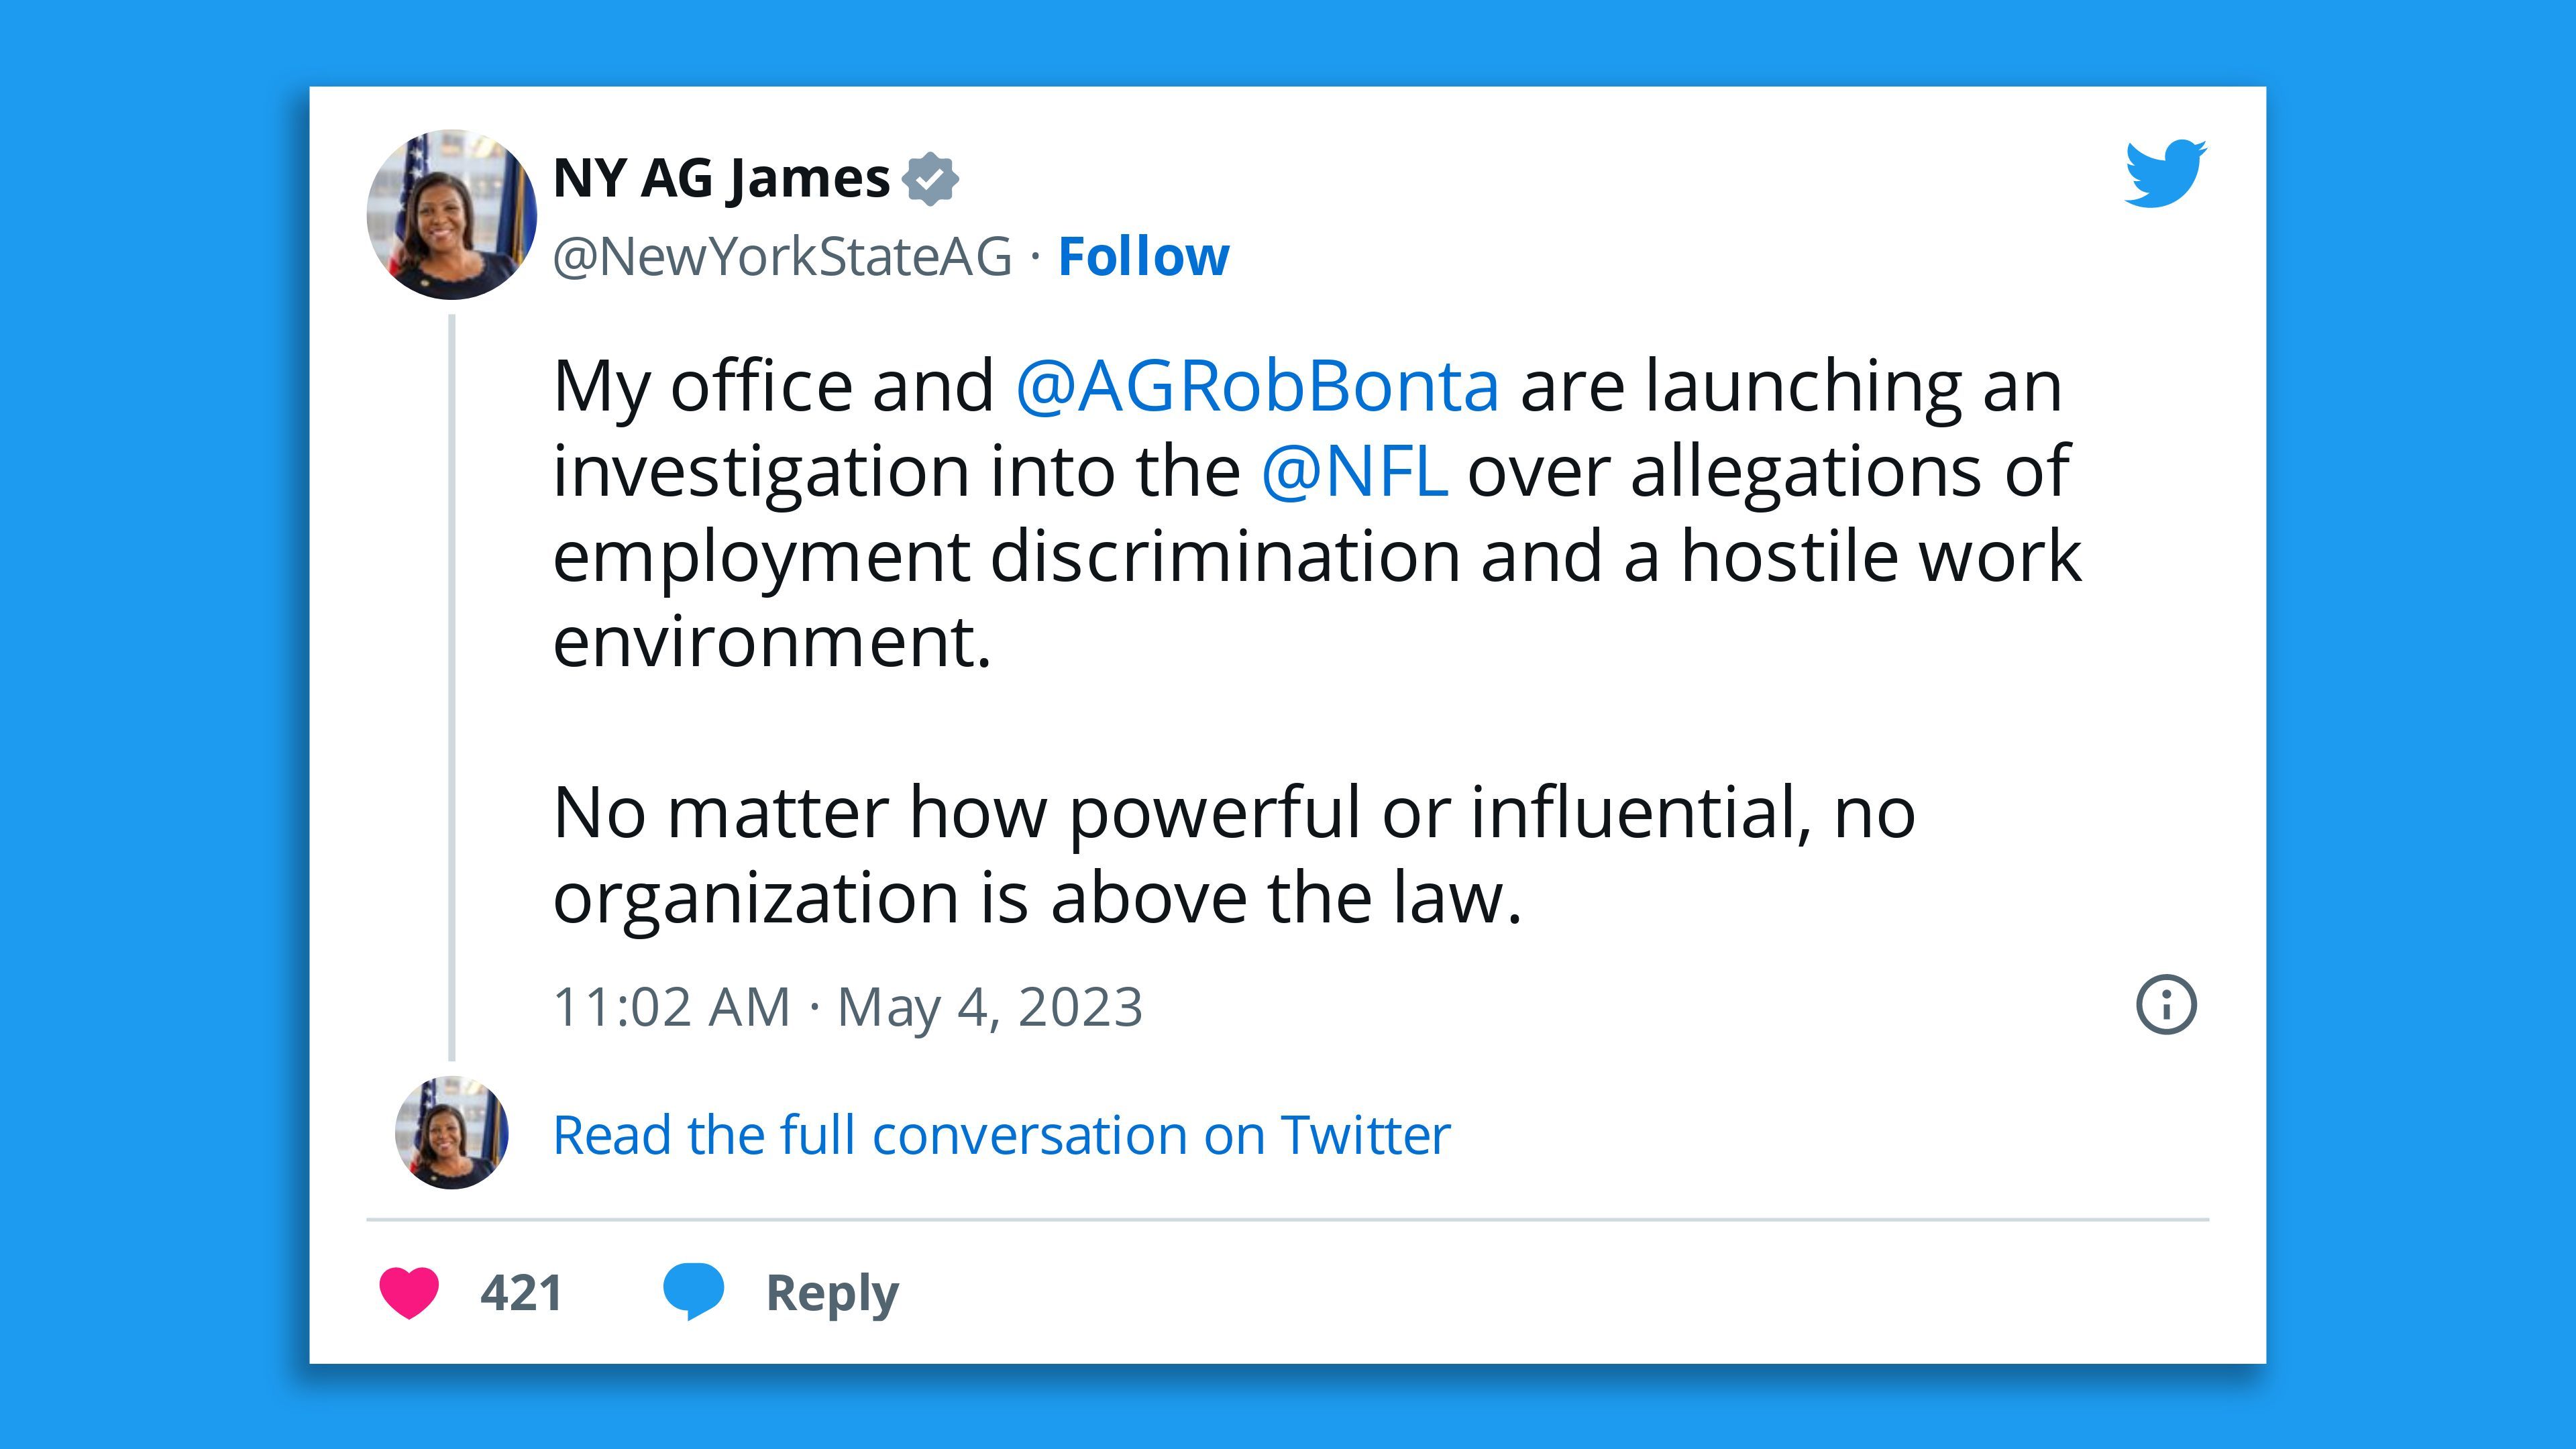 A screenshot of a tweet by New York Attorney General Letitia James stating: "My office and  @AGRobBonta  are launching an investigation into the  @NFL  over allegations of employment discrimination and a hostile work environment.  No matter how powerful or influential, no organization is above the law."